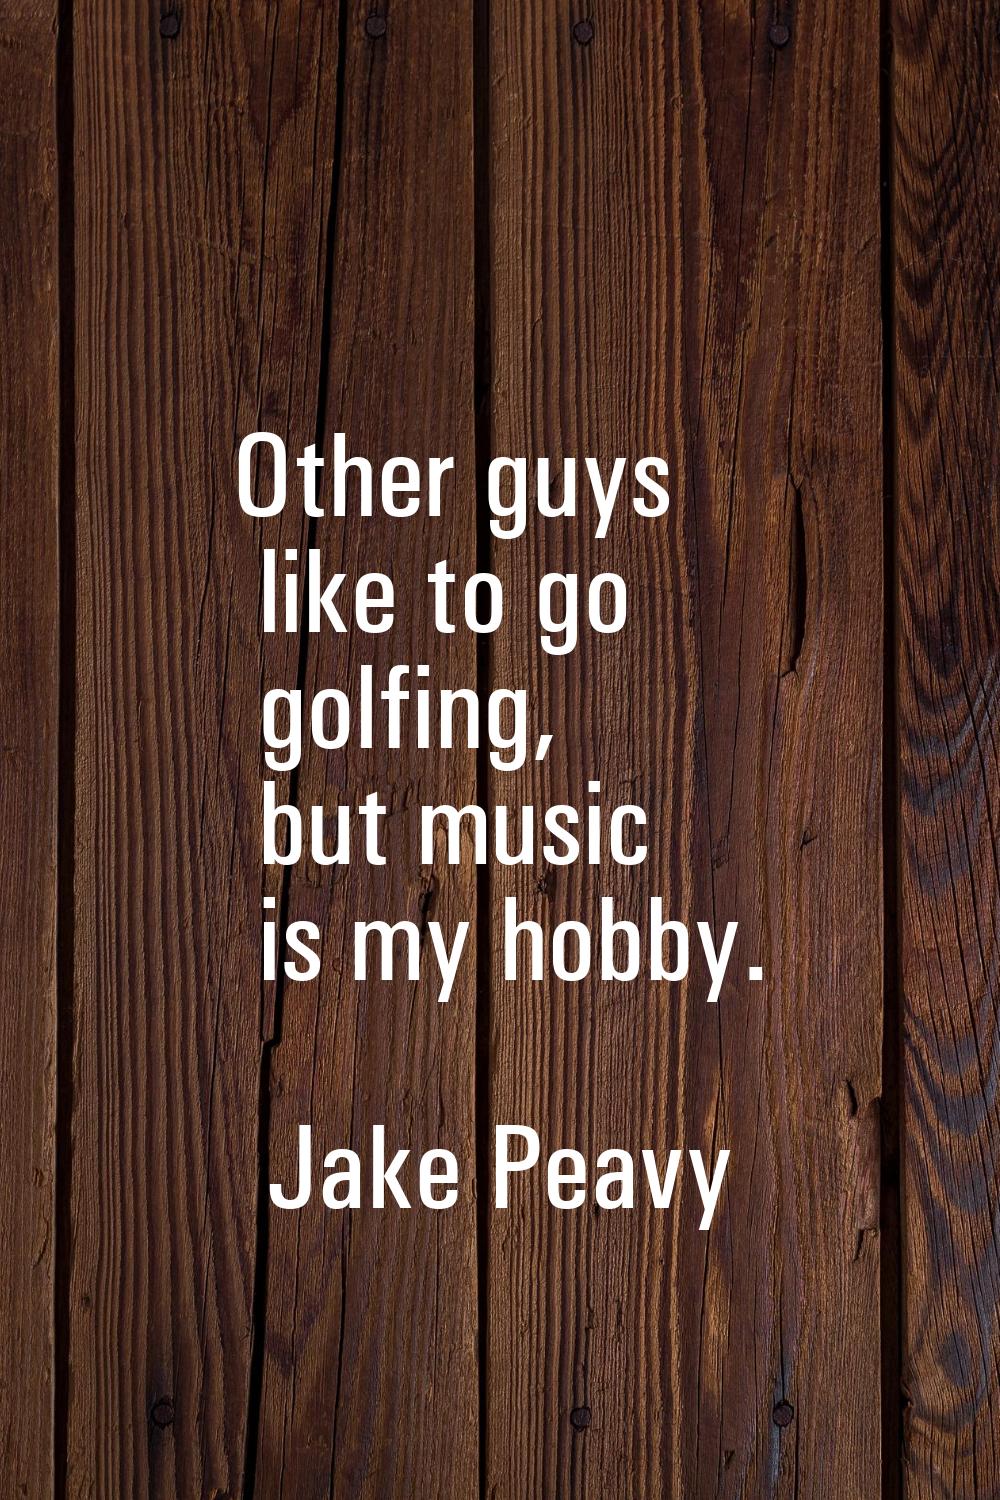 Other guys like to go golfing, but music is my hobby.